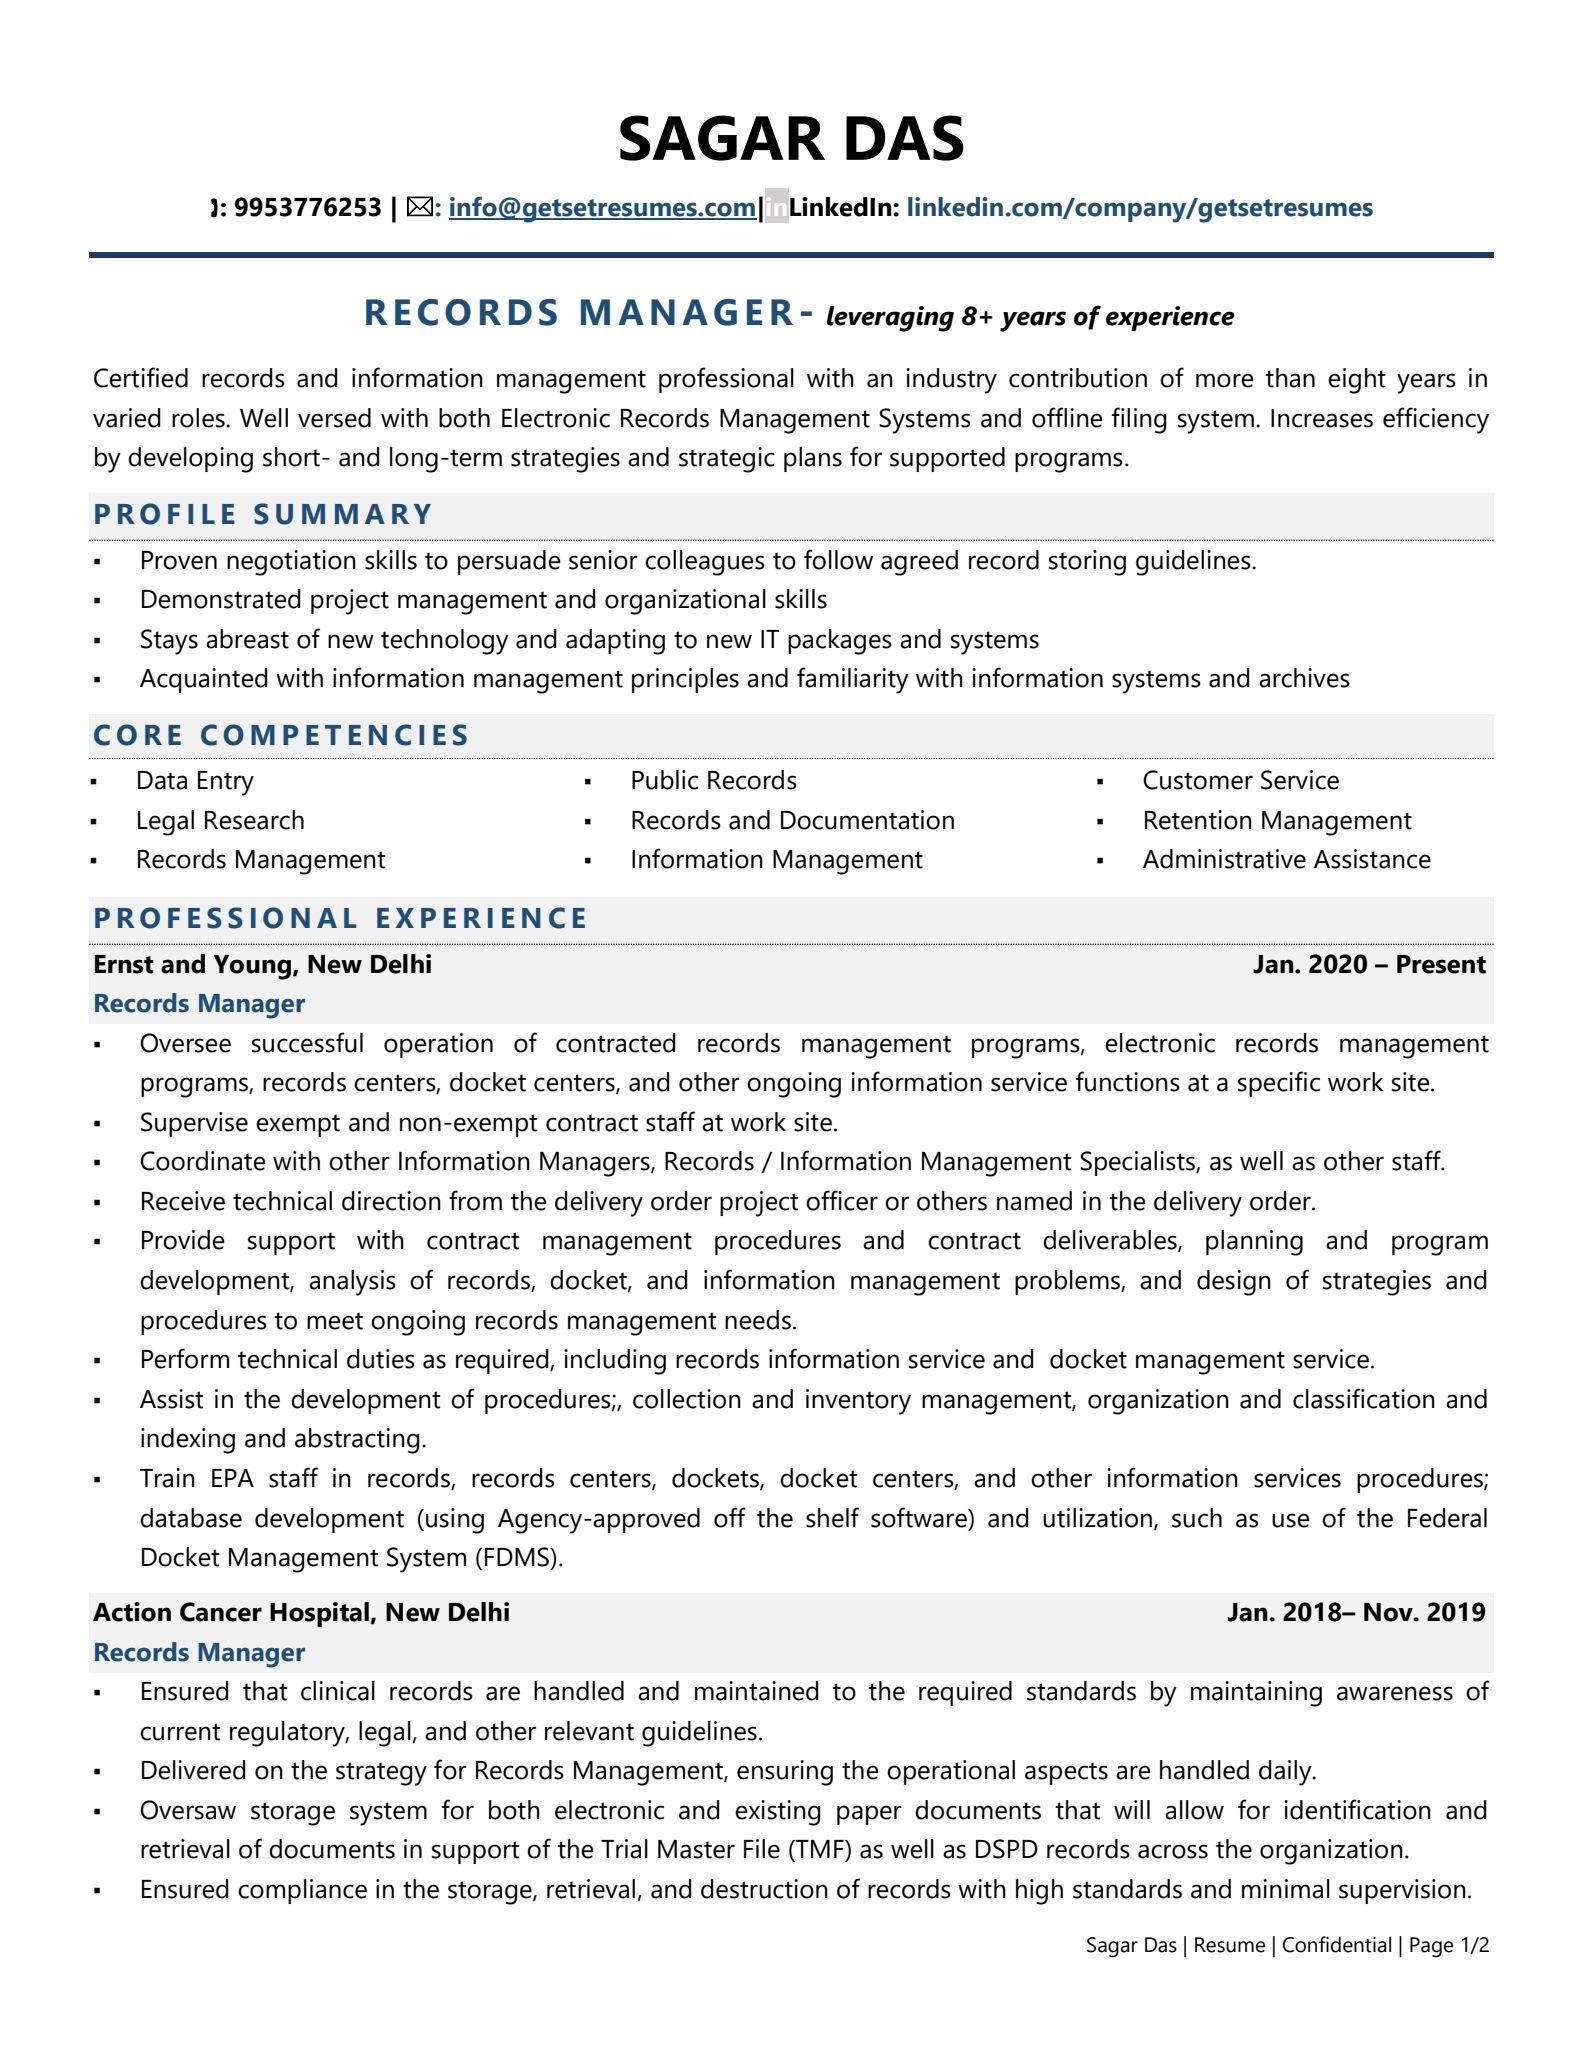 Records Manager - Resume Example & Template